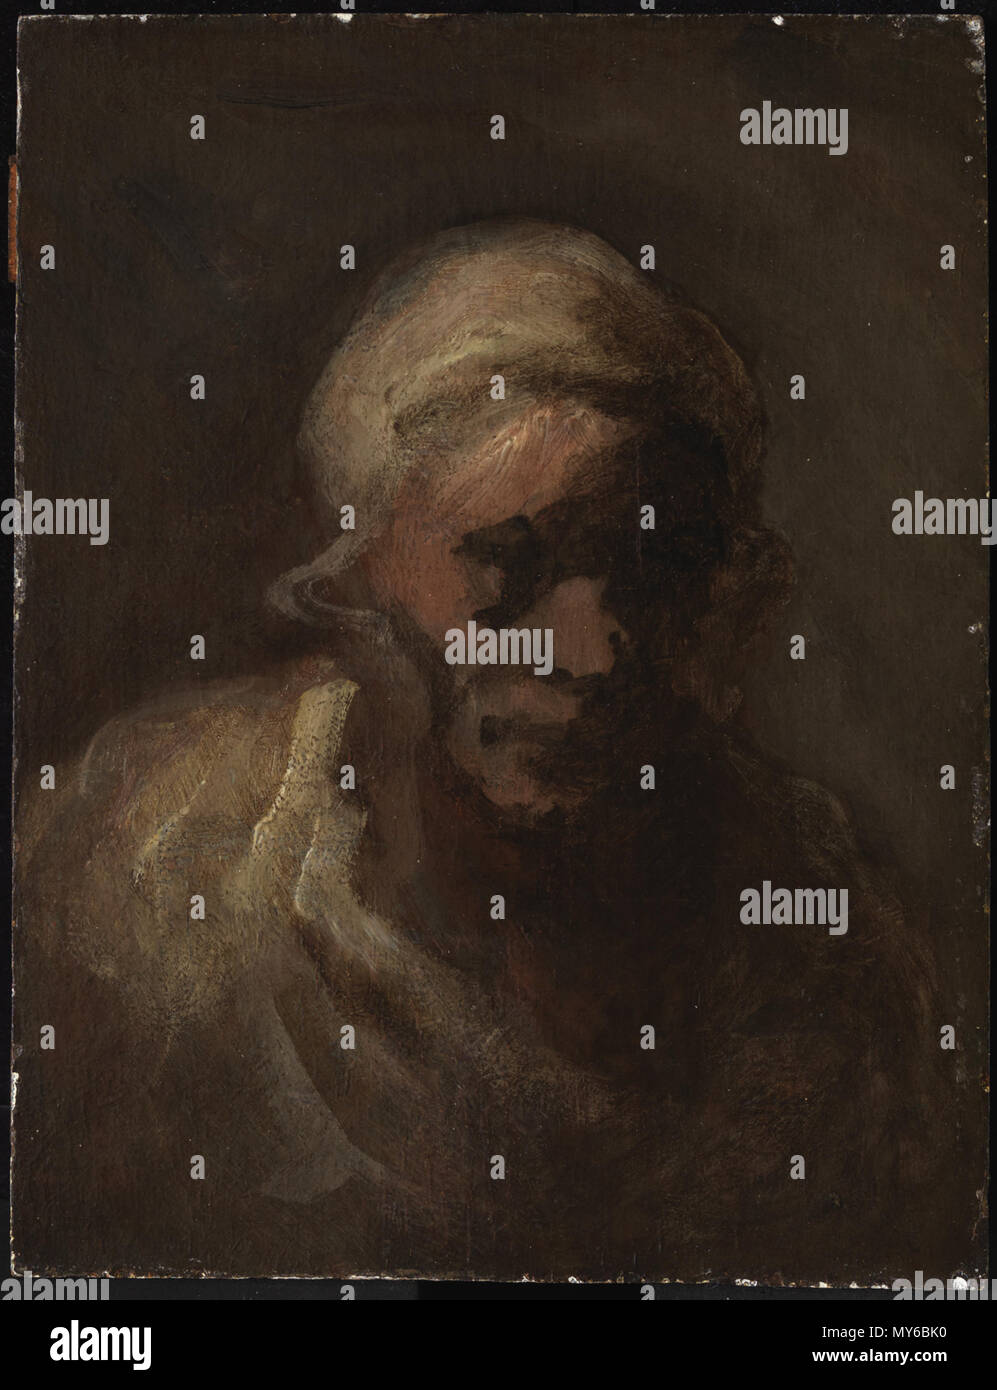 .  English: Honoré Daumier, French, 1808–1879 Head of an Old Woman, ca. 1856–60 Oil on panel 21.9 x 16.5 cm. (8 5/8 x 6 1/2 in.) frame: 30.5 x 36.0 x 6.5 cm. (12 x 14 3/16 x 2 9/16 in.) The Henry and Rose Pearlman Foundation, on long-term loan to the Princeton University Art Museum L.1988.62.8 Maison (1968) I-108 . circa 1856–60 7 1856, Daumier, Head of an Old Woman Stock Photo